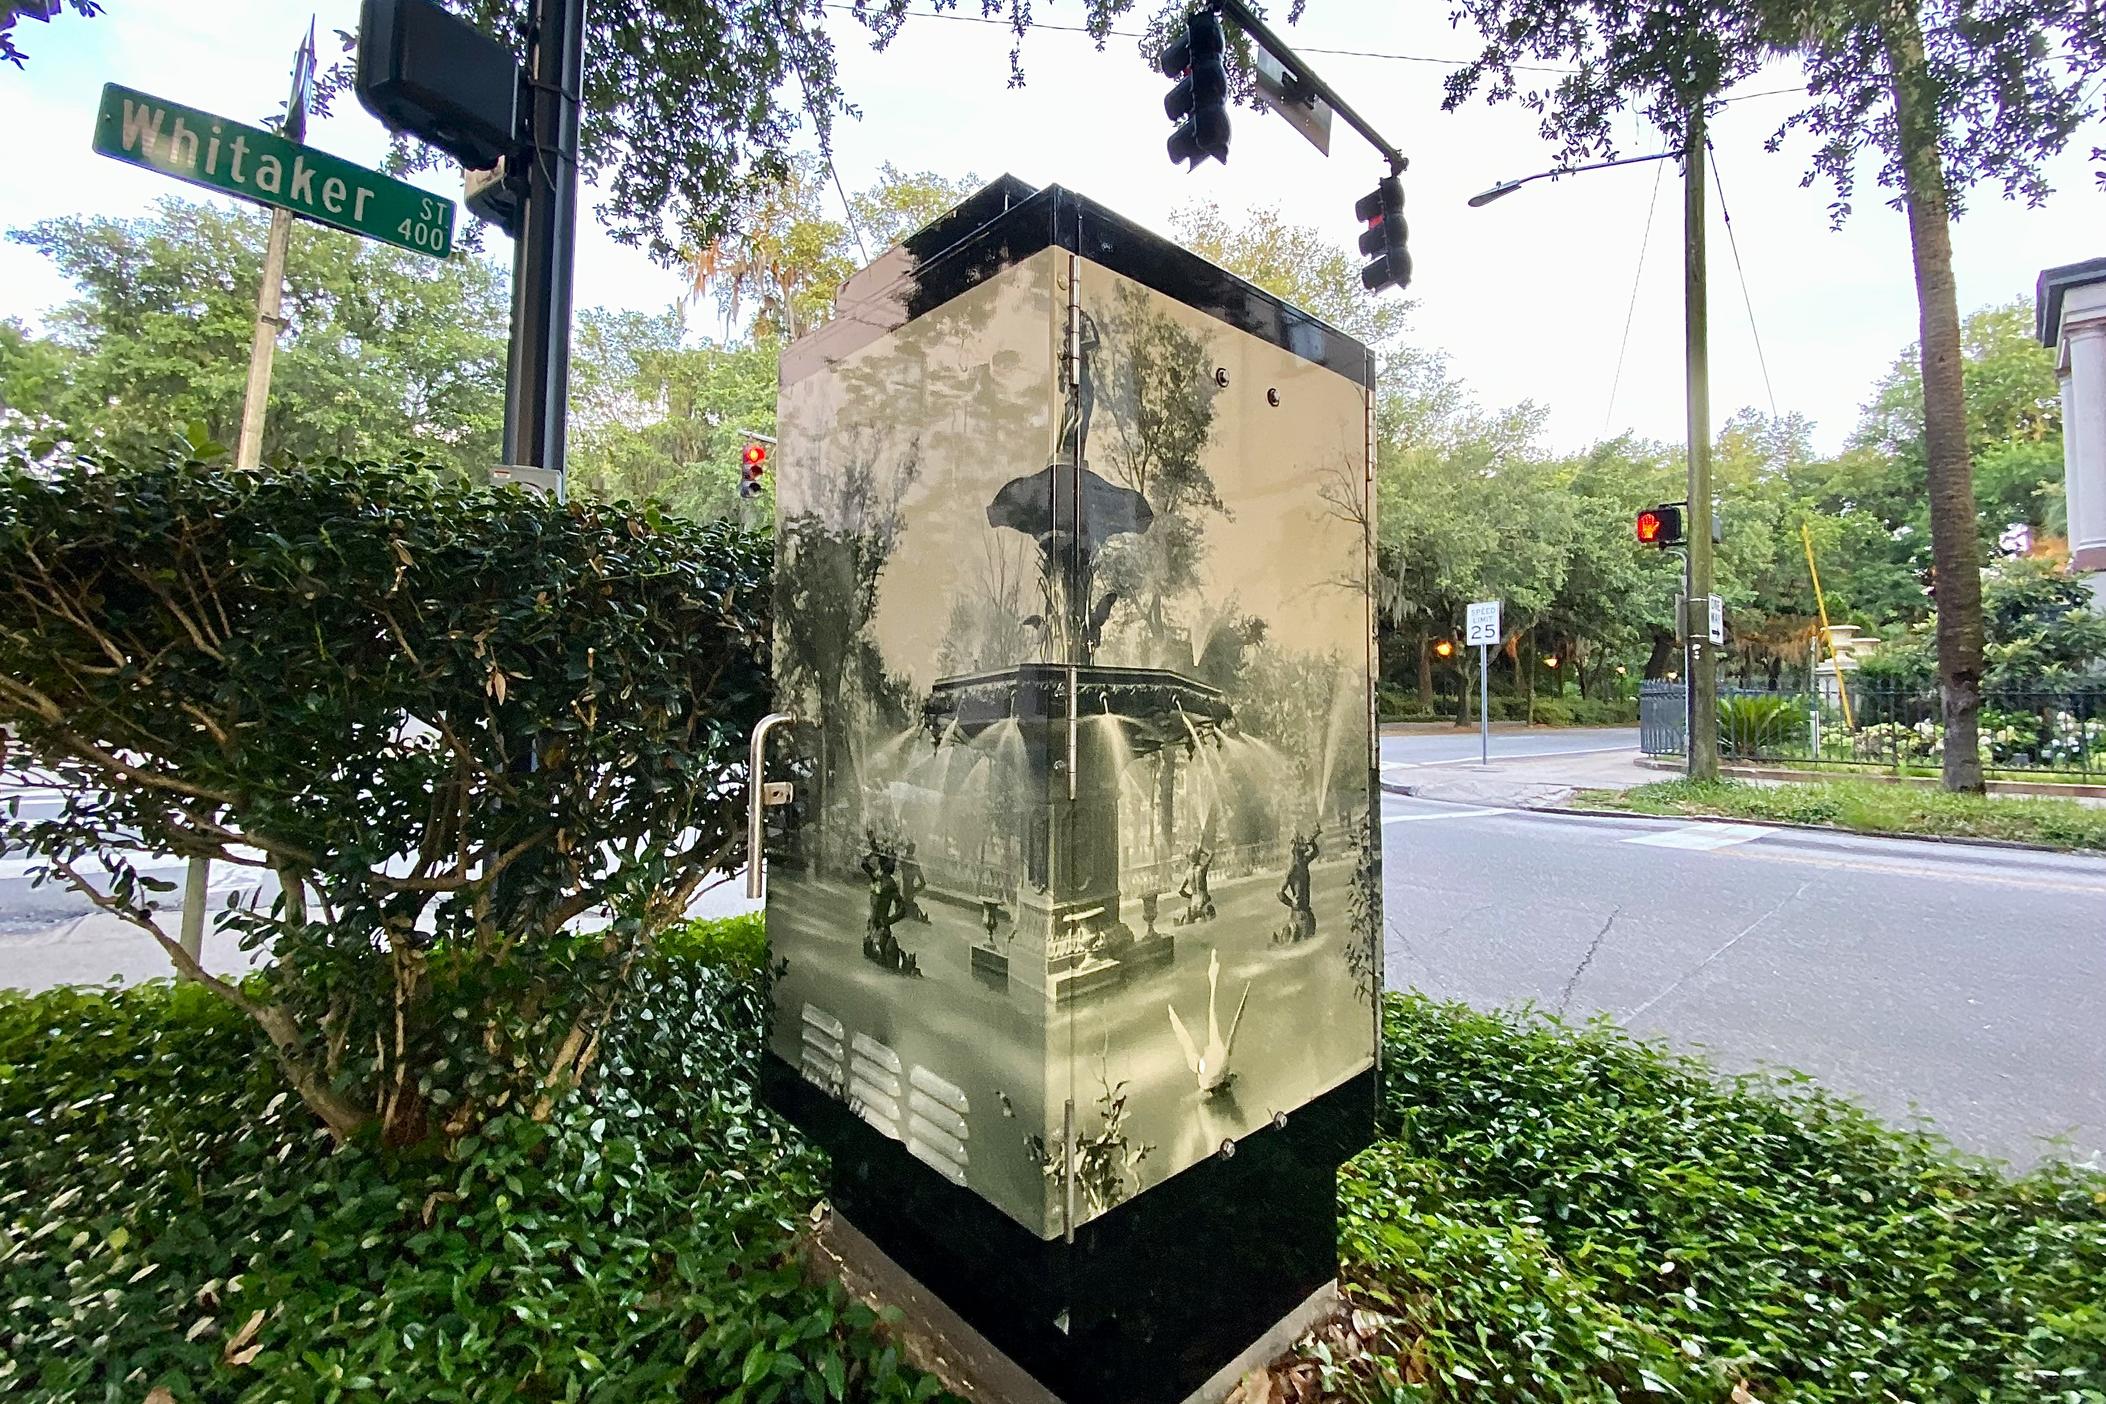 An archival photo of Savannah's Forsyth Park fountain circa 1902 is displayed on a new vinyl laminate covering around a traffic light cabinet at the intersection of Whitaker Street and Gaston Street.